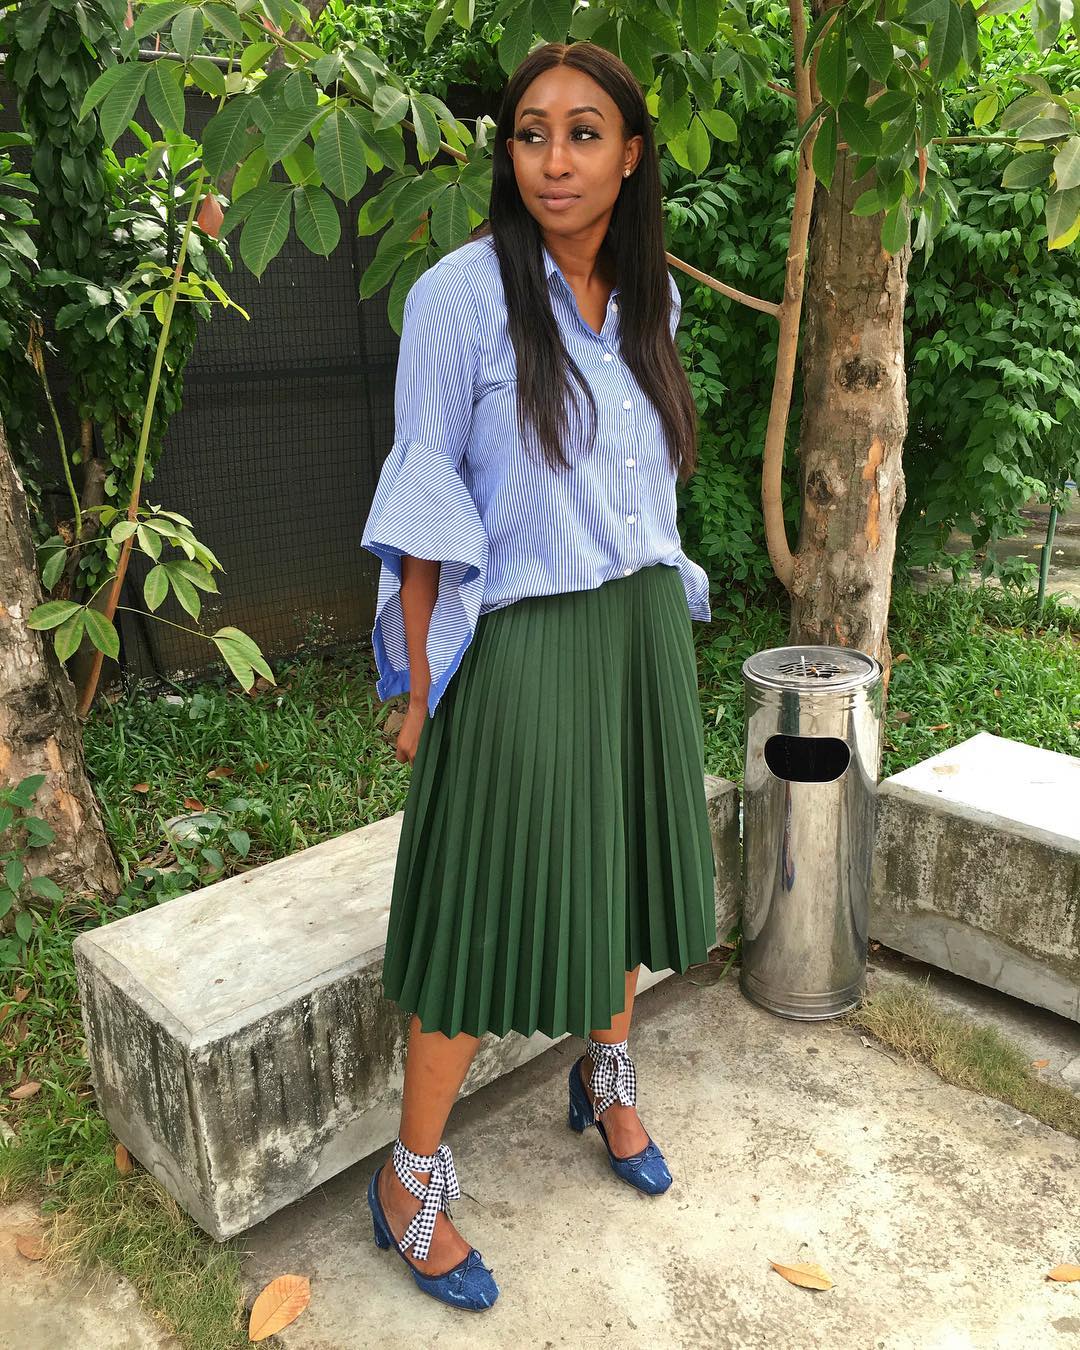 Image result for veronica odeka wearing corporate skirts